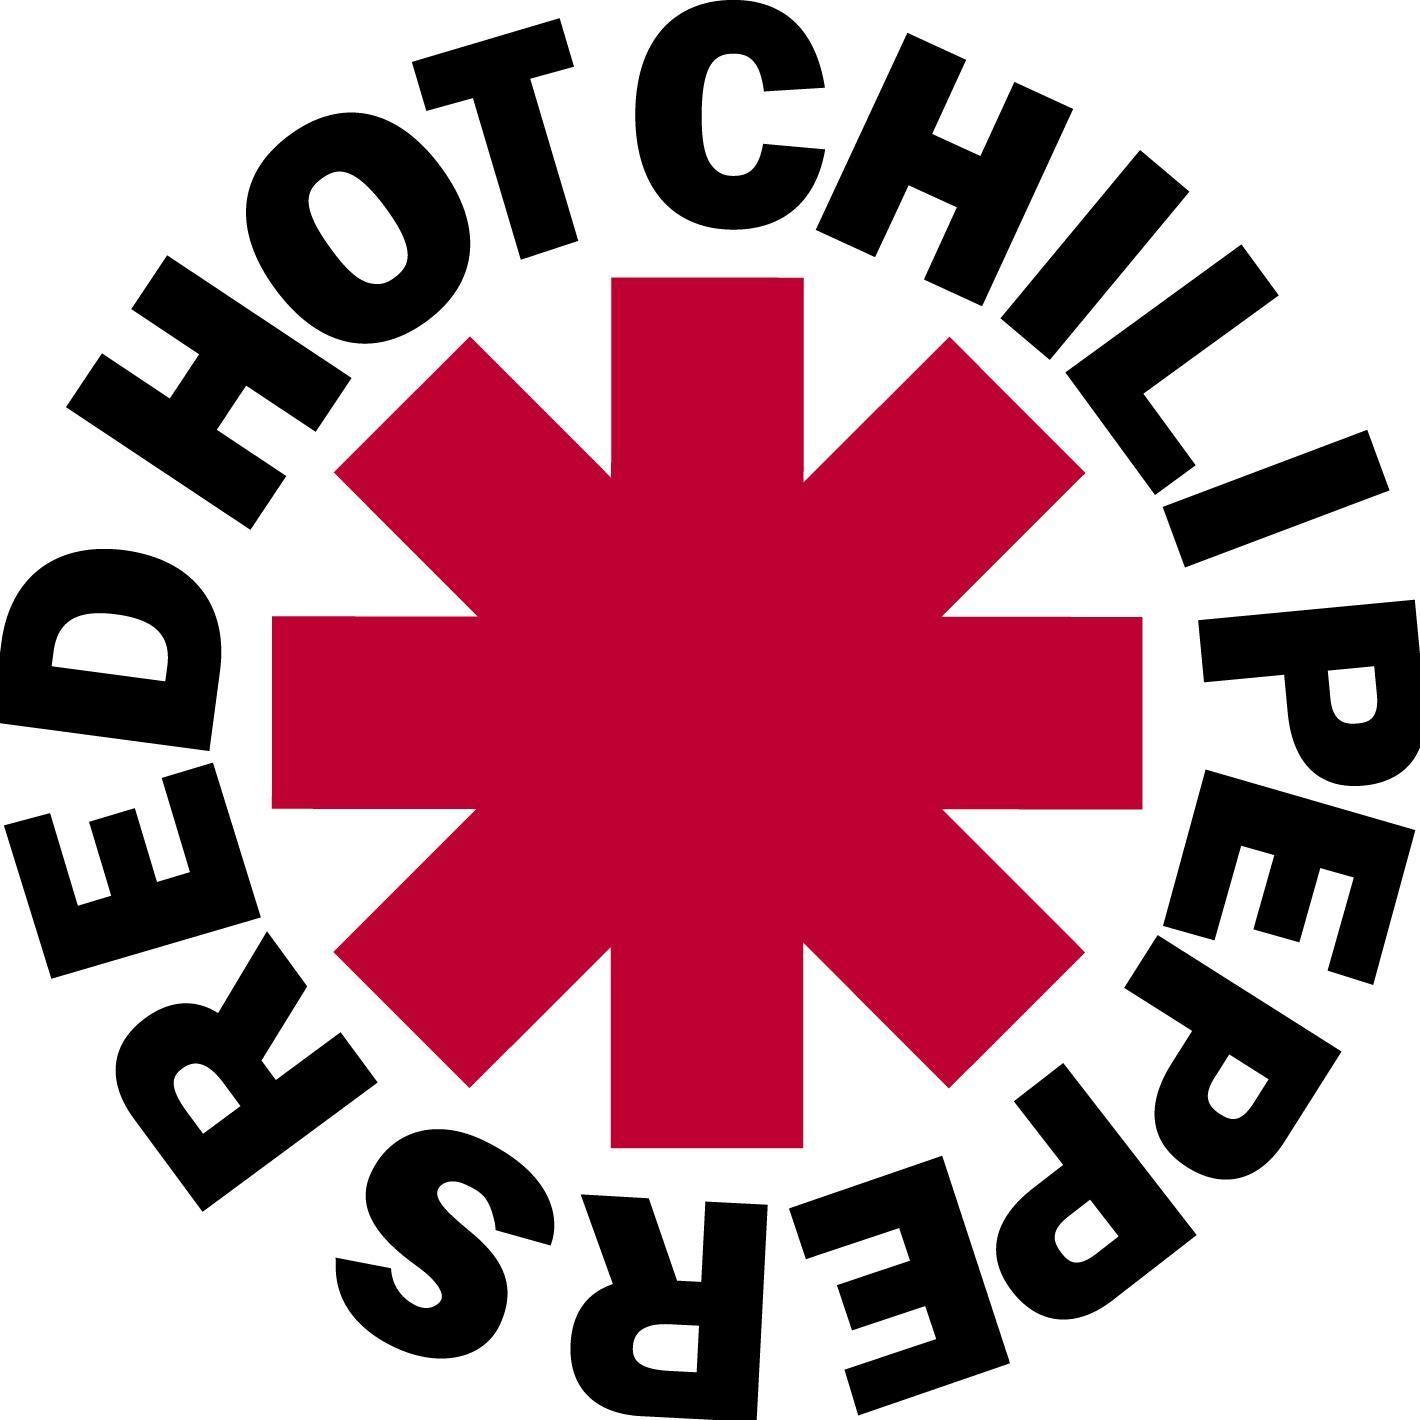 Birds Red Hot Chili Peppers Logo - Red Hot ChiliPeppers! Get tickets for Red Hot